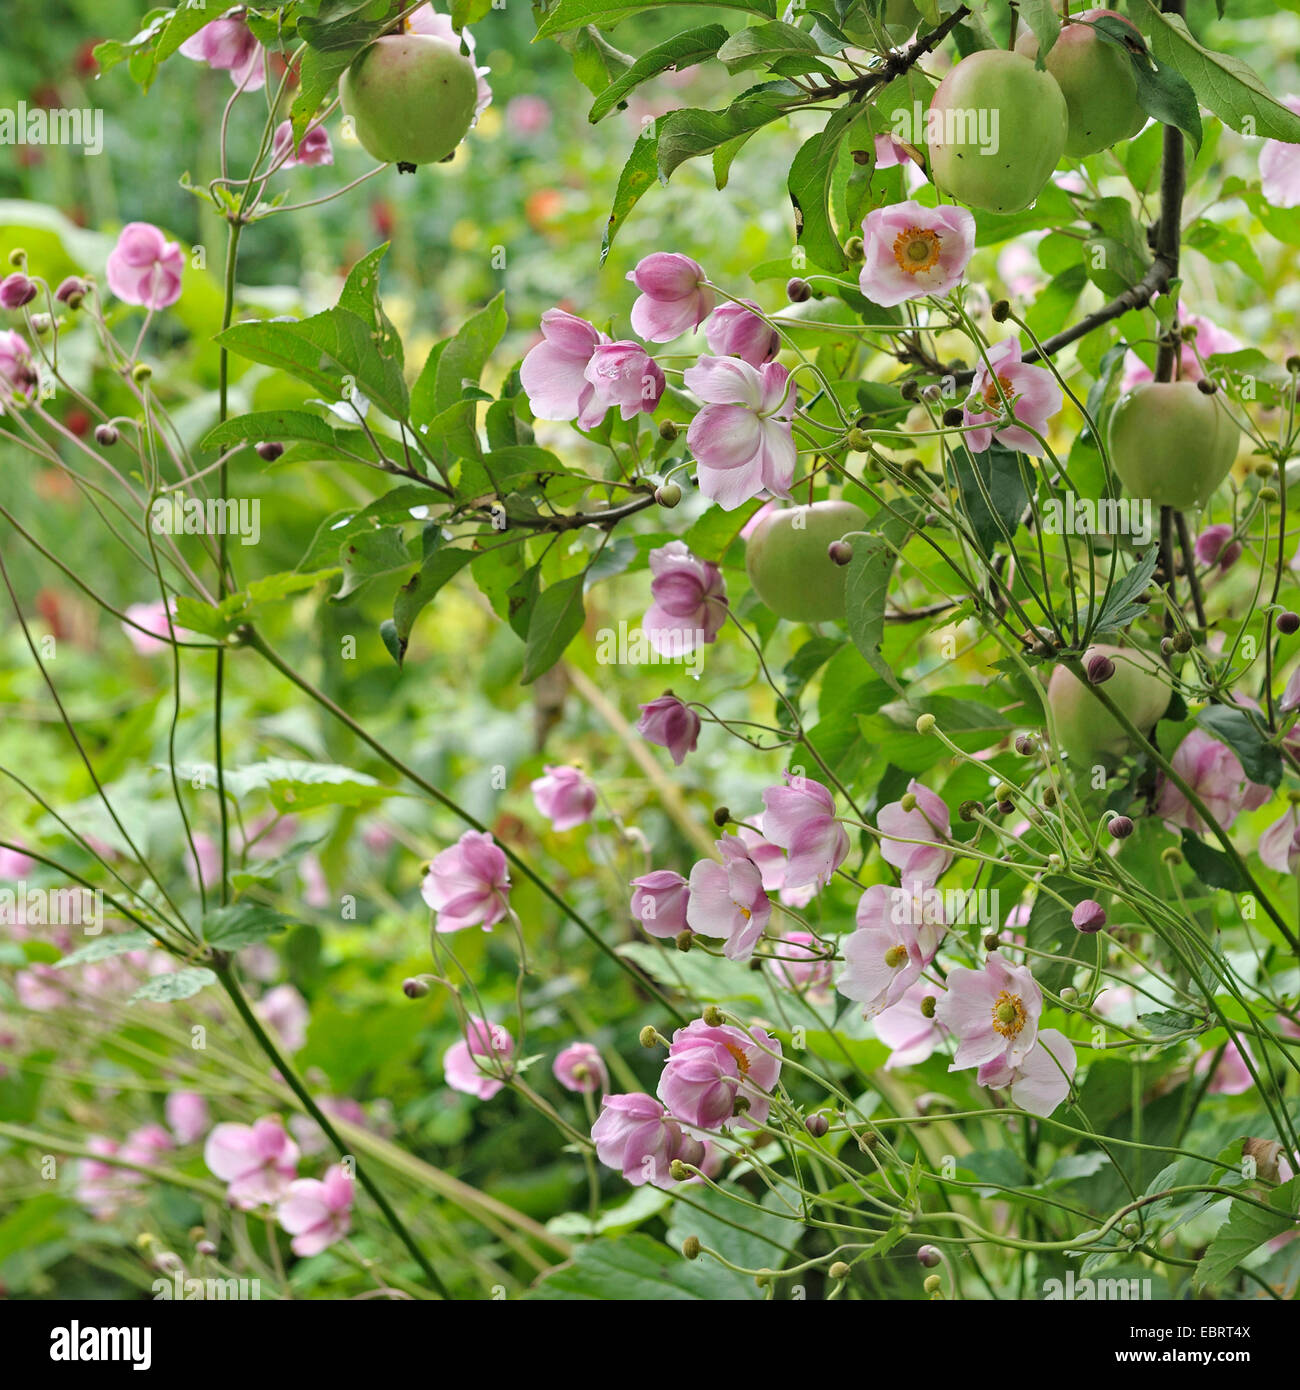 Autumn Anemone (Anemone tomentosa 'Robustissima', Anemone tomentosa Robustissima), cultivar Robustissima, with apple tree of cultivar Gloster, Germany, Saxony Stock Photo